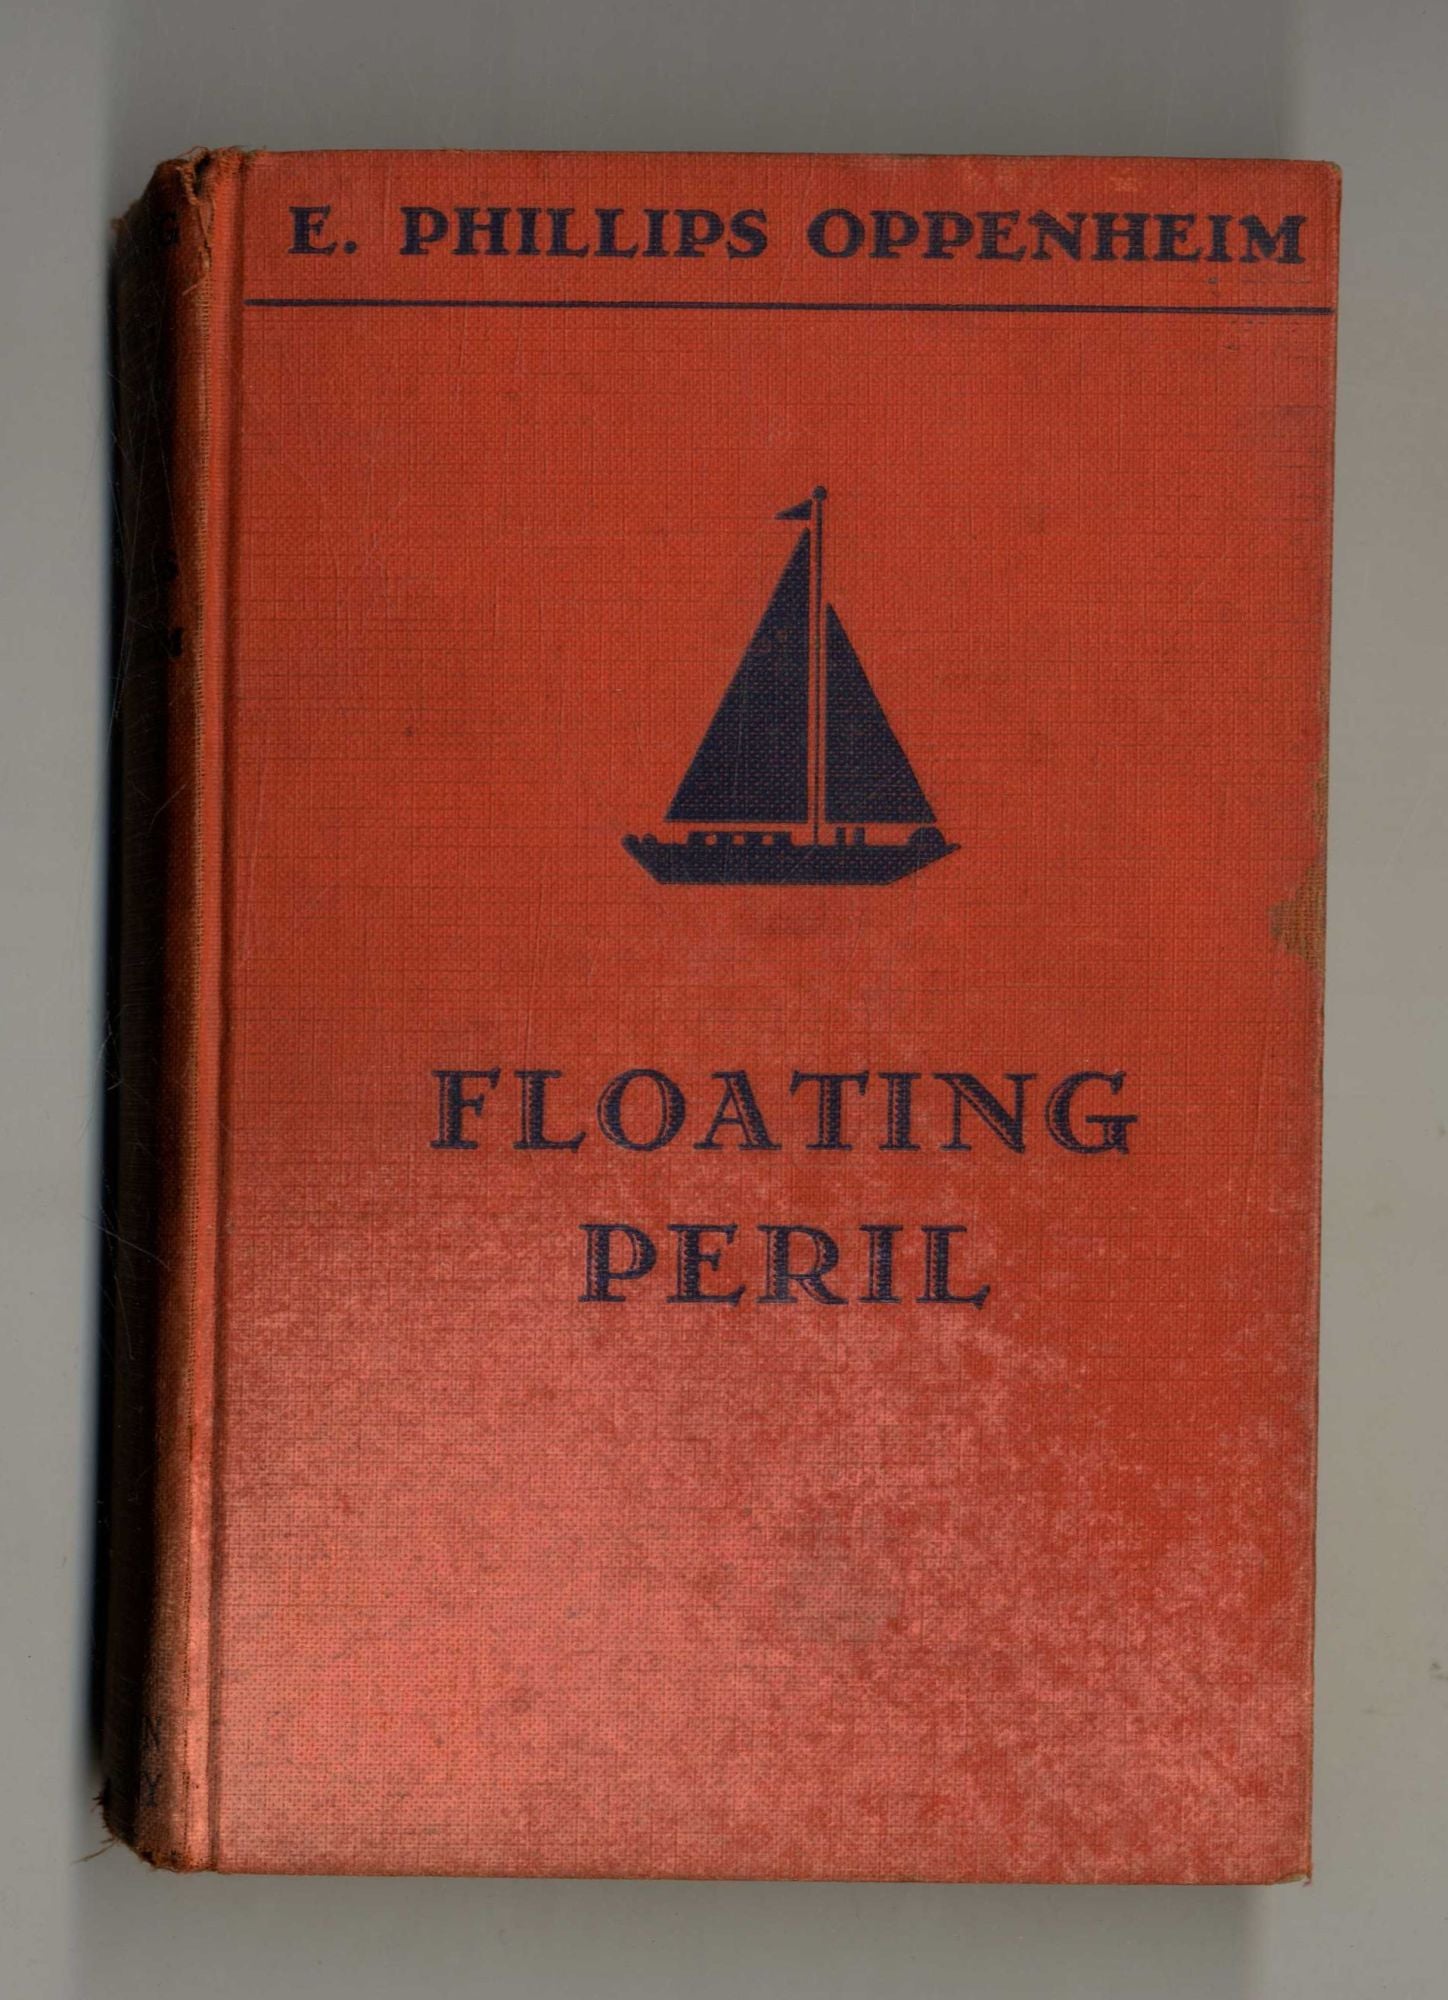 Book #160298 Floating Peril 1st Edition/1st Printing. E. Phillips Oppenheim.